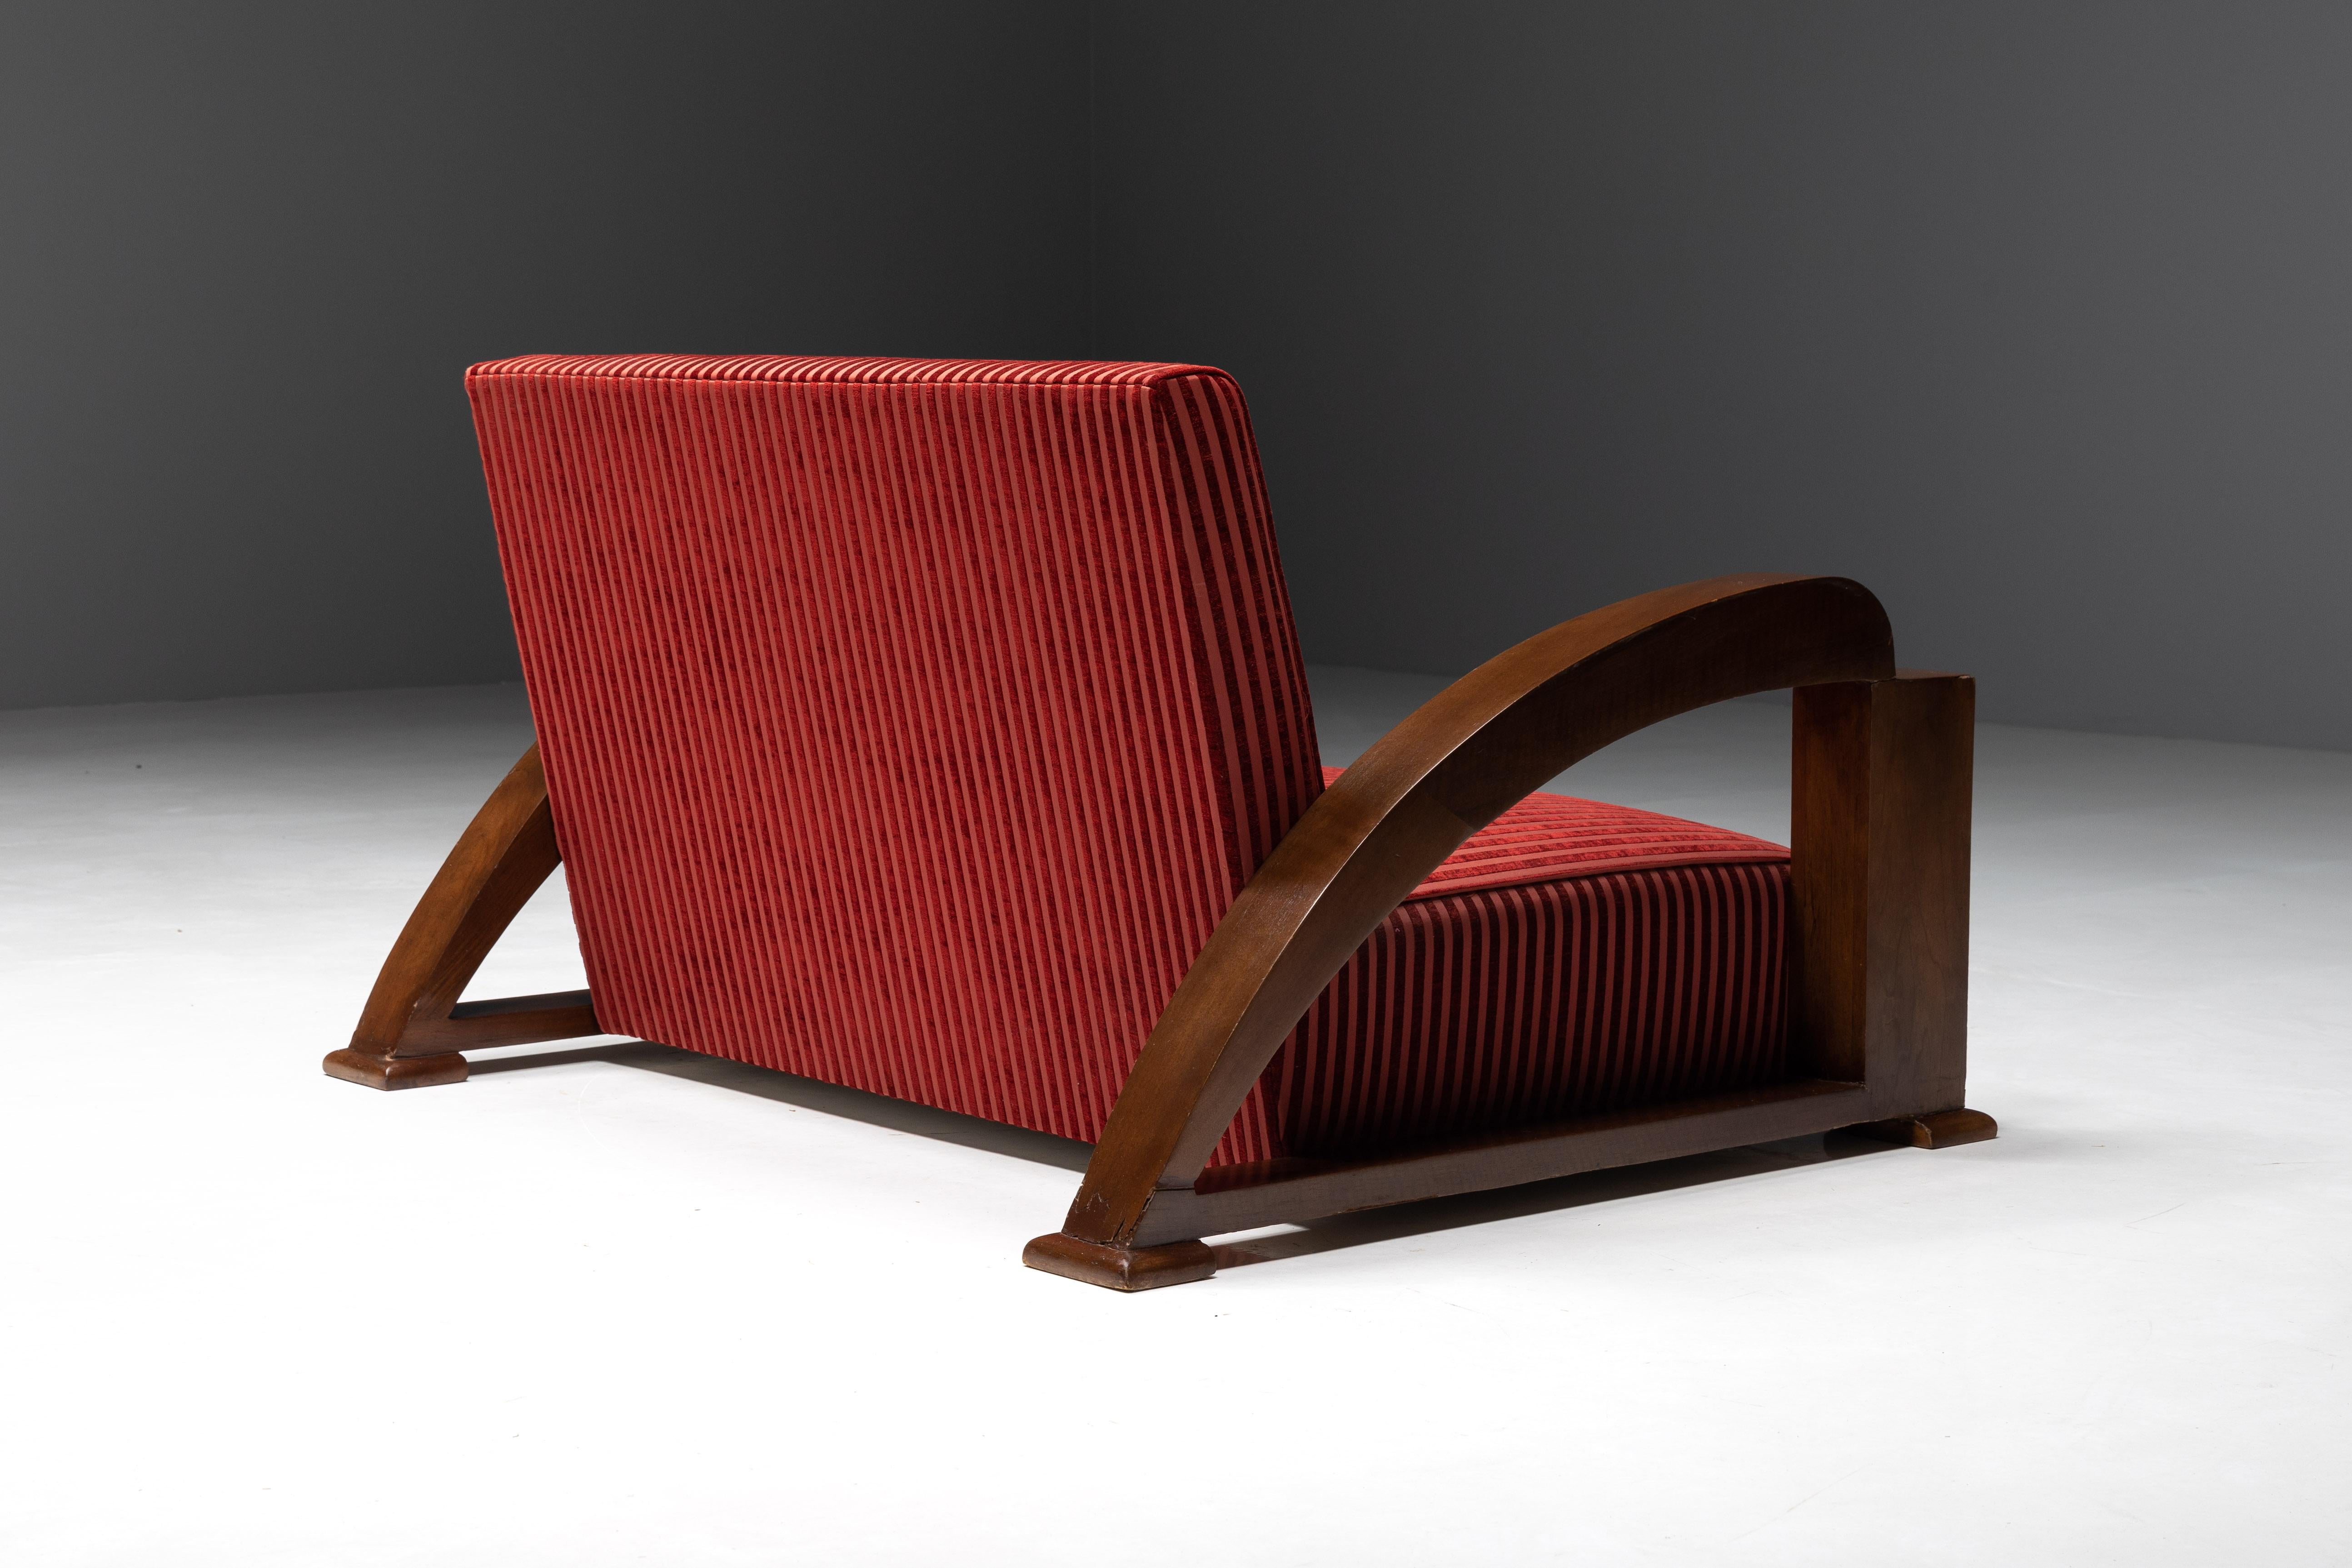 Art Deco Sofa in Red Striped Velvet and with Swoosh Armrests, France, 1940s For Sale 7